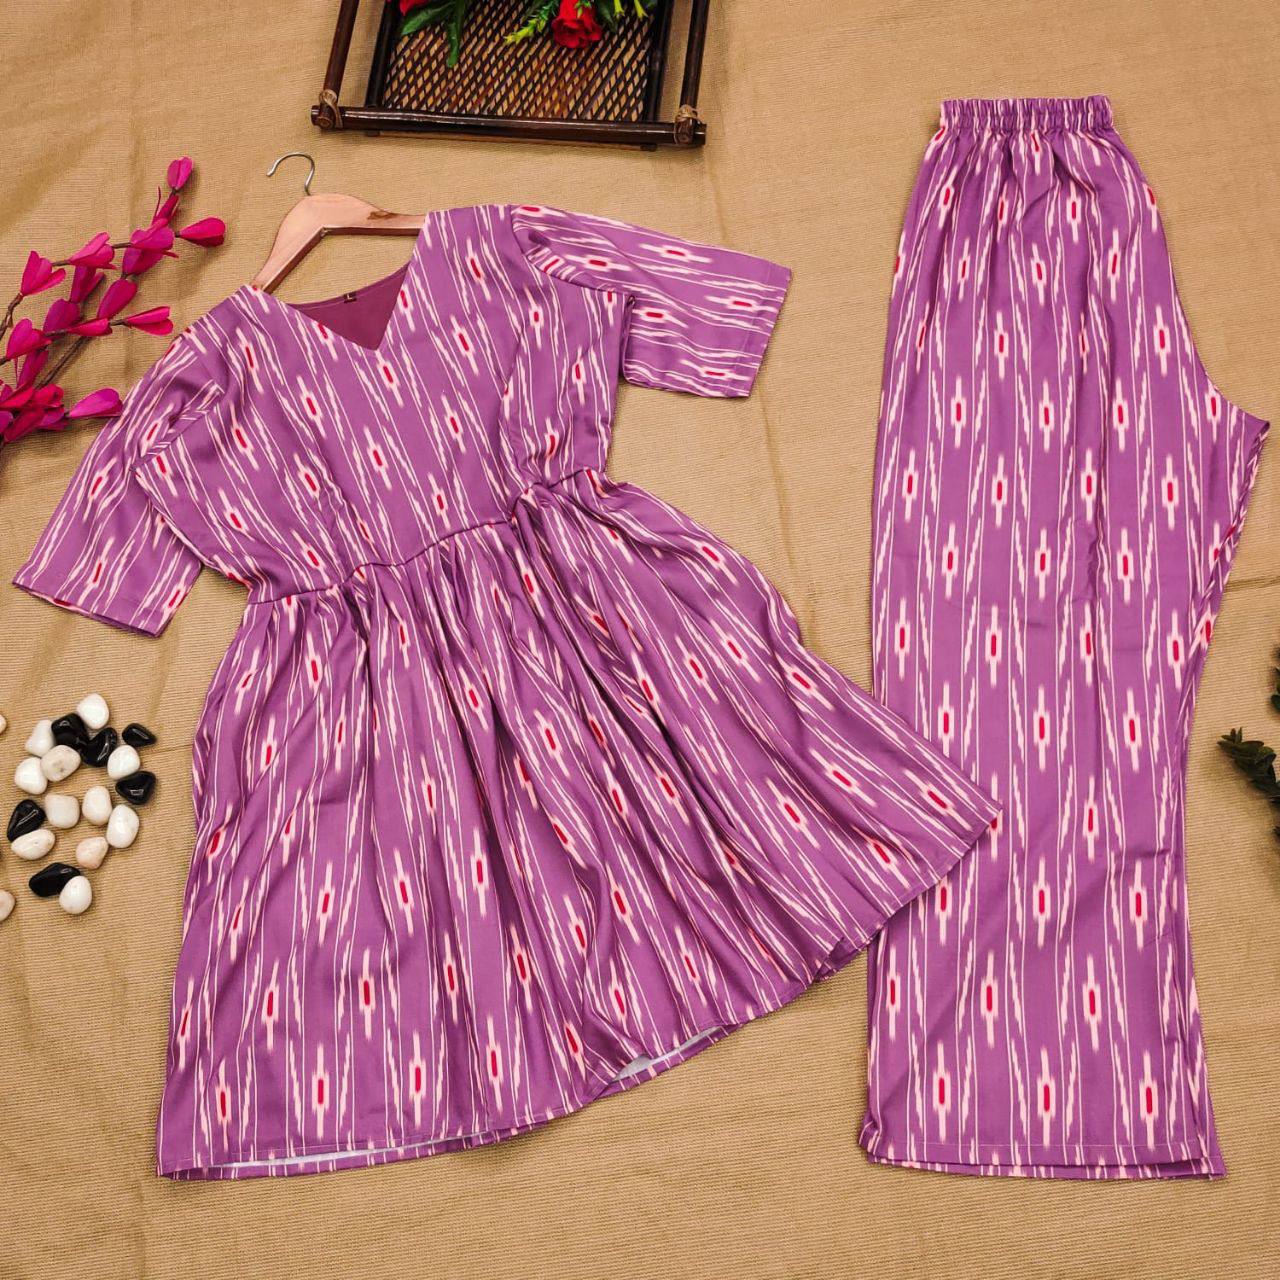 Perfect Fit For This Winter Casuals To For Formals Co Ord Set Rayon/Muslin Summer Special To Pair